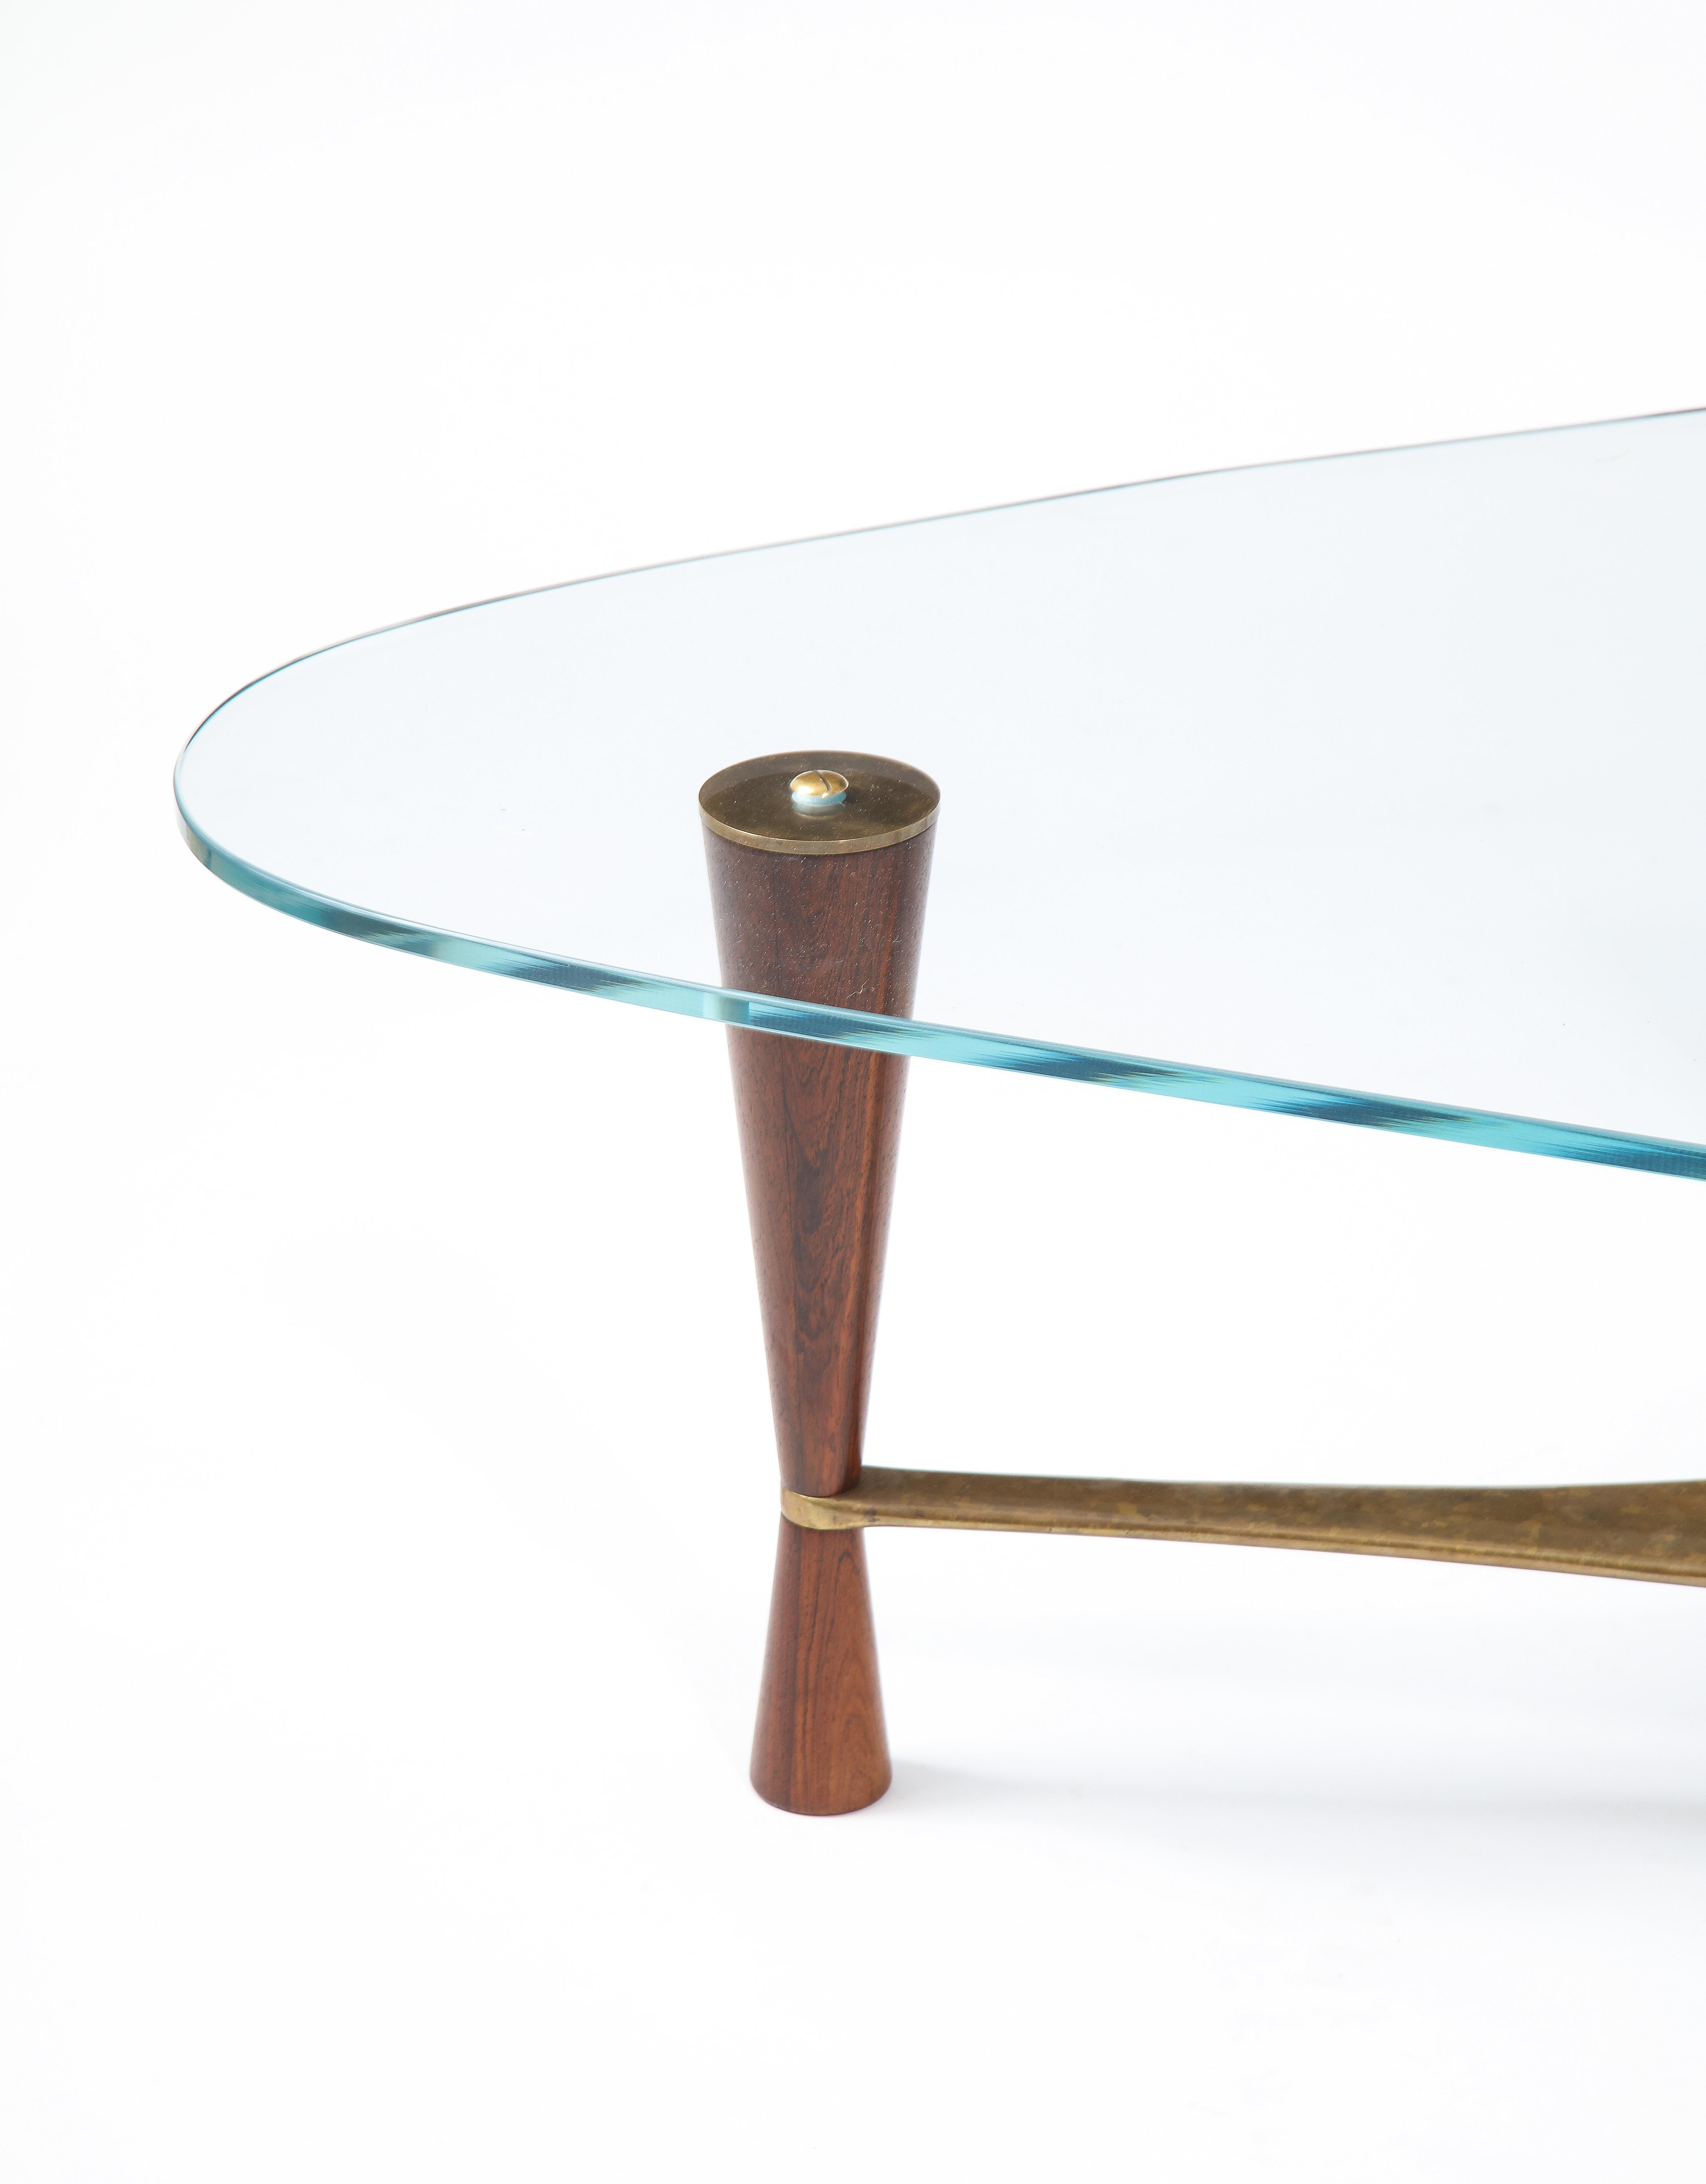 Designed by Edward Wormley and manufactured by Dunbar. 

USA, 1950's. 

A prime example of American Mid-Century design. Soft and subtle geometric form with wood + brass finishes that age and patina beautifully. 

Glass top secured in place to the